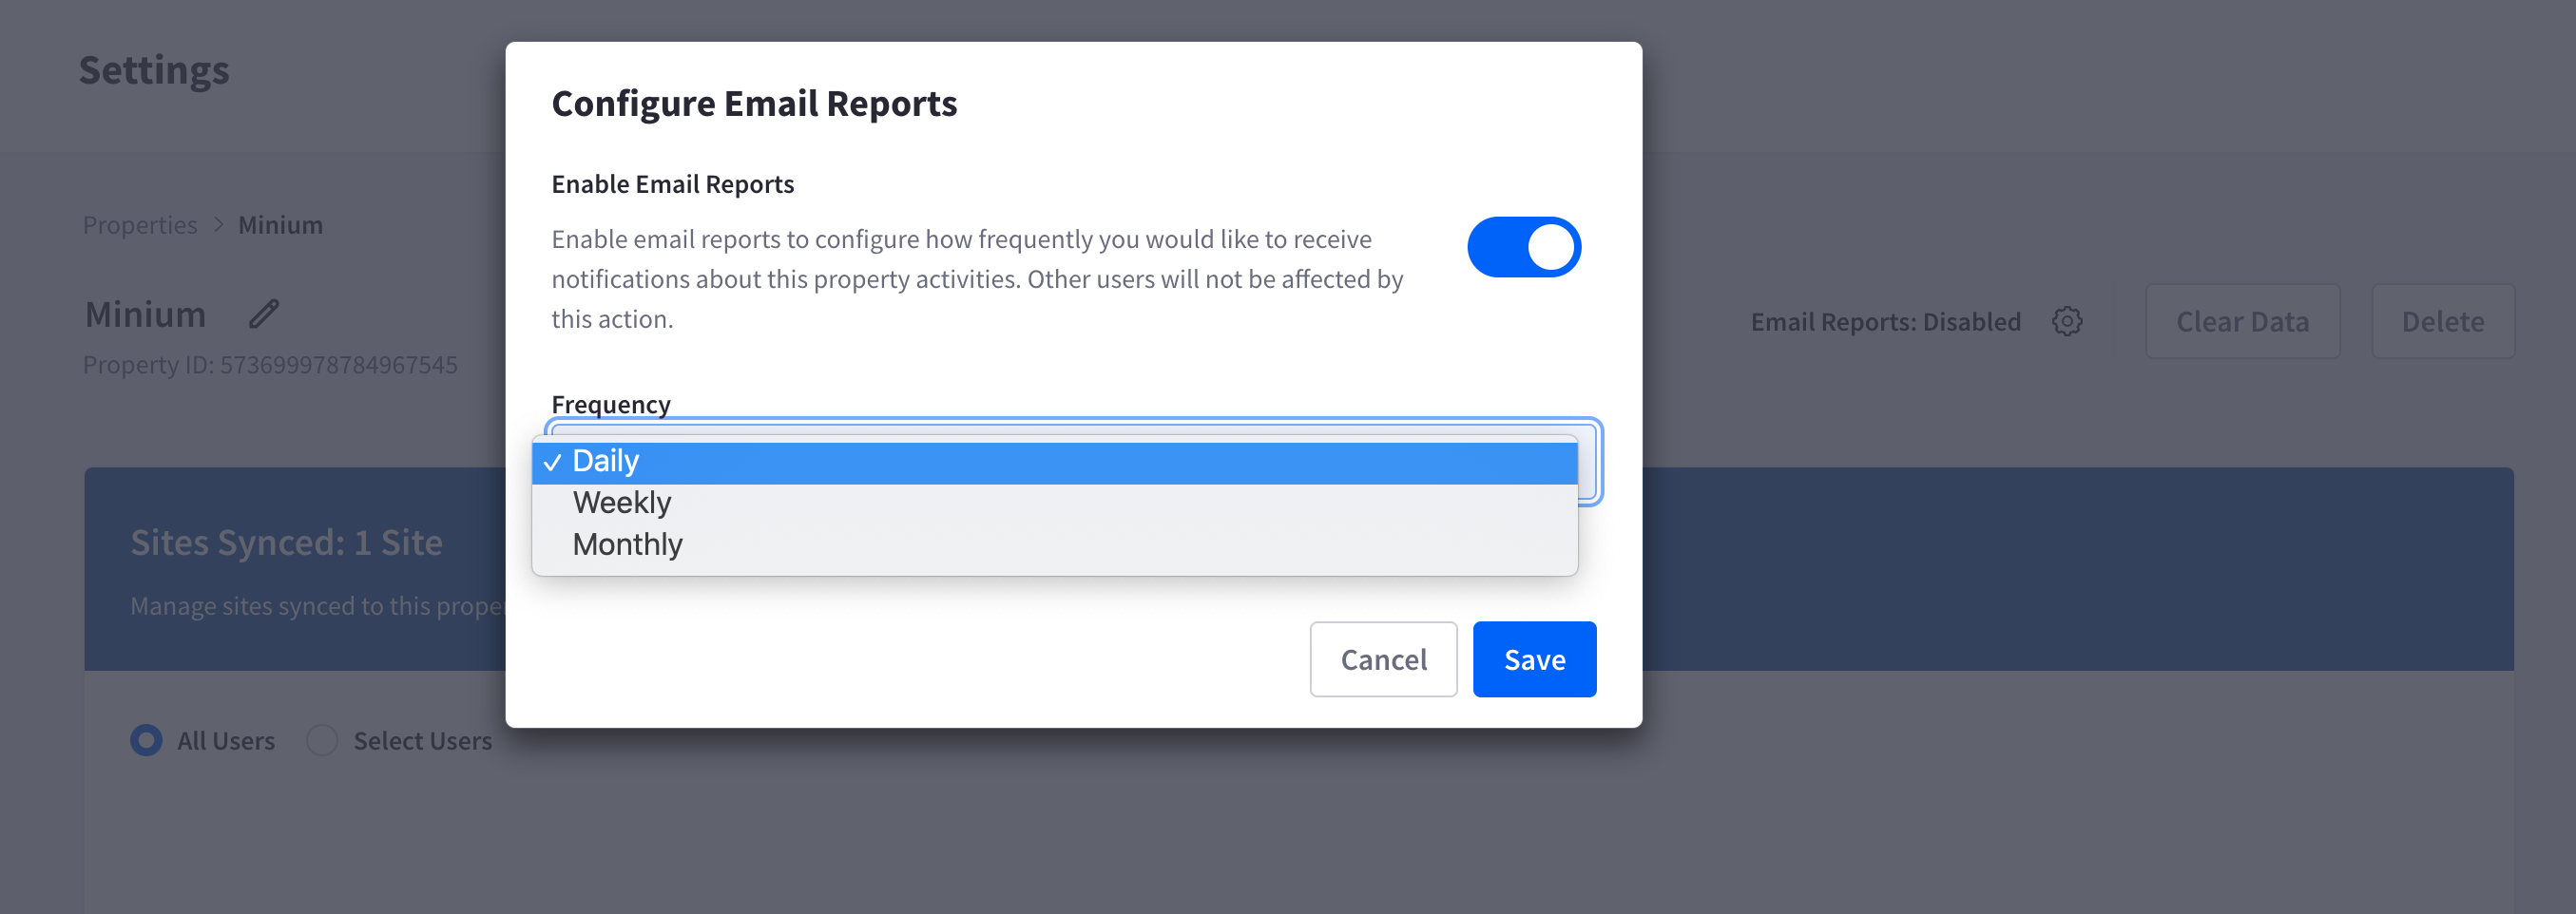 Toggle the switch to enable email reports and select a frequency.